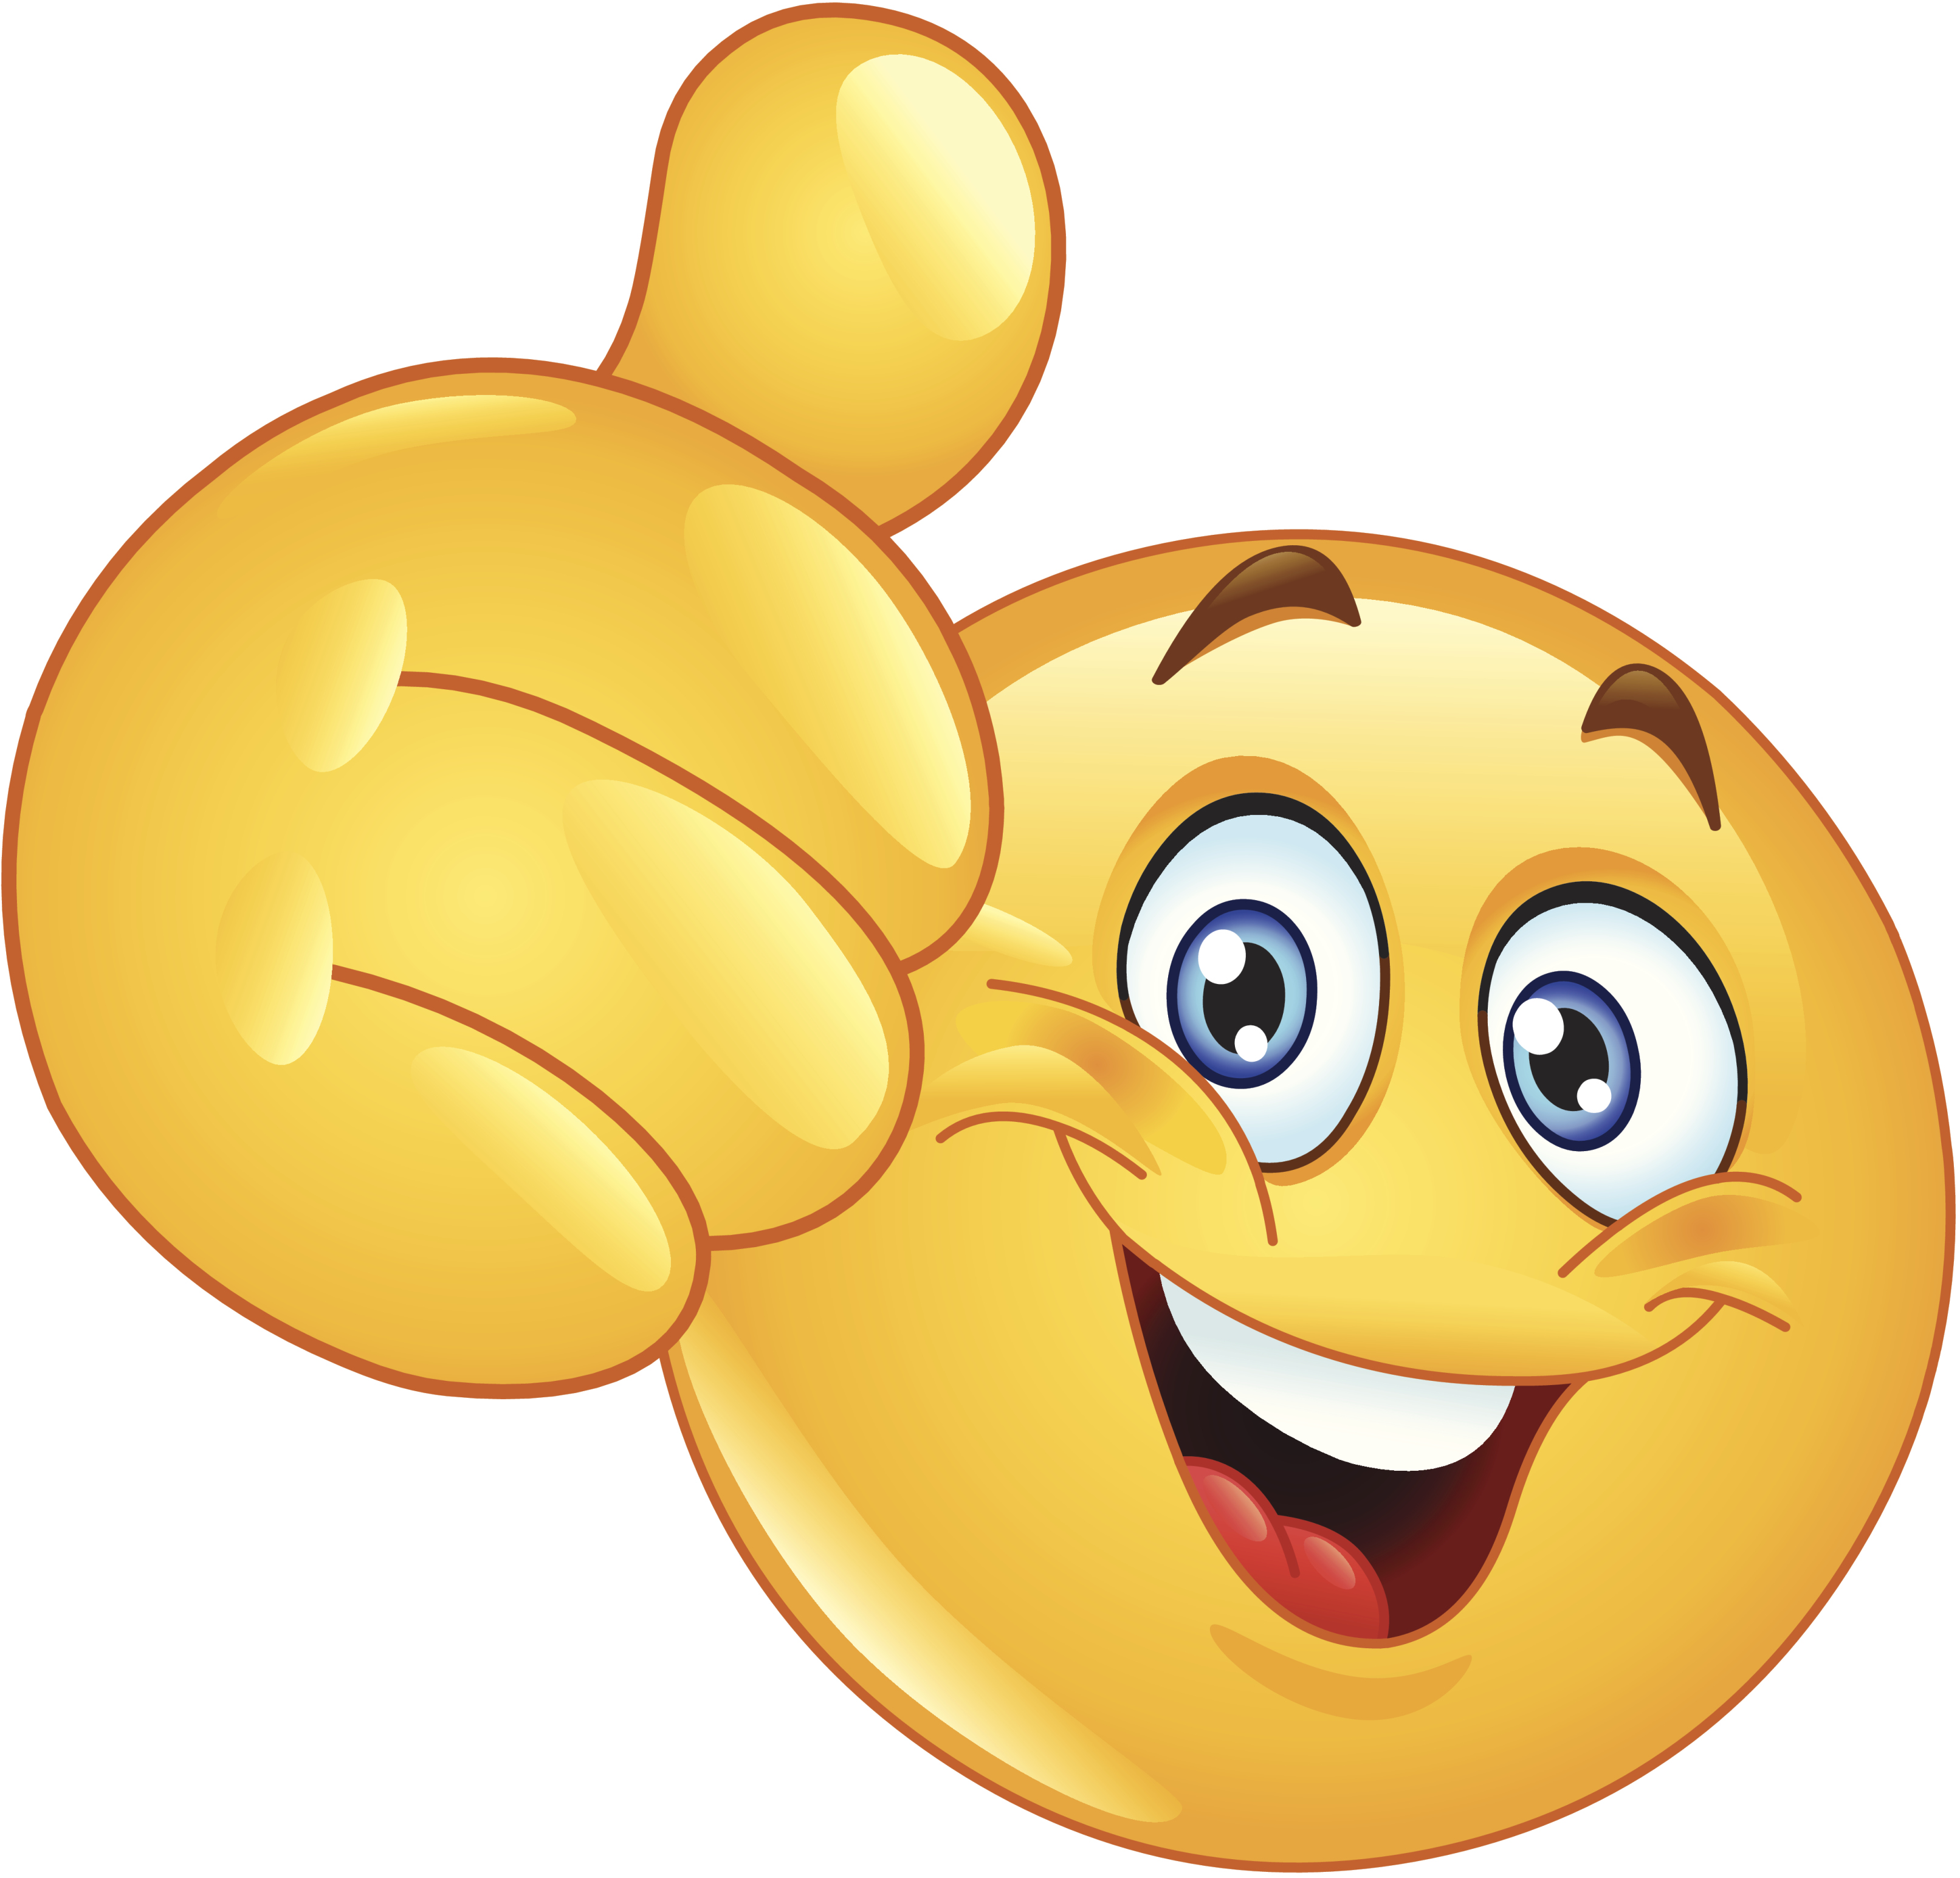 Free Animated Smiley Face, Download Free Clip Art, Free Clip Art on.